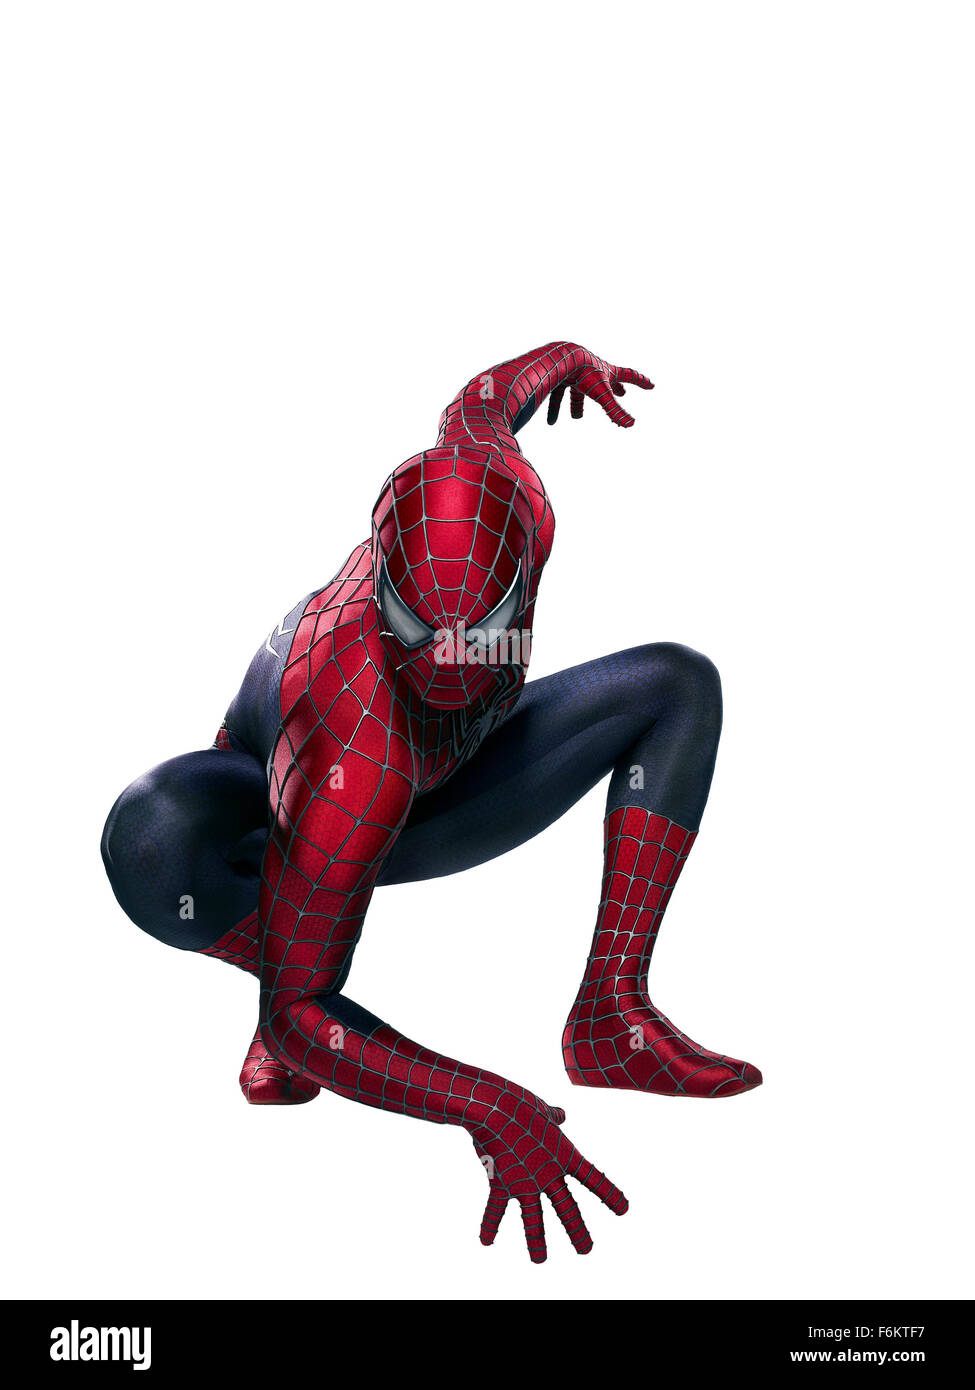 RELEASE DATE: May 4, 2007. MOVIE TITLE: Spider-Man 3. STUDIO: Columbia Pictures. PLOT: A strange black entity from another world bonds with Peter Parker and causes inner turmoil as he contends with new villains, temptations, and revenge. PICTURED: TOBEY MAGUIRE as Peter Parker/Spider-Man. Stock Photo